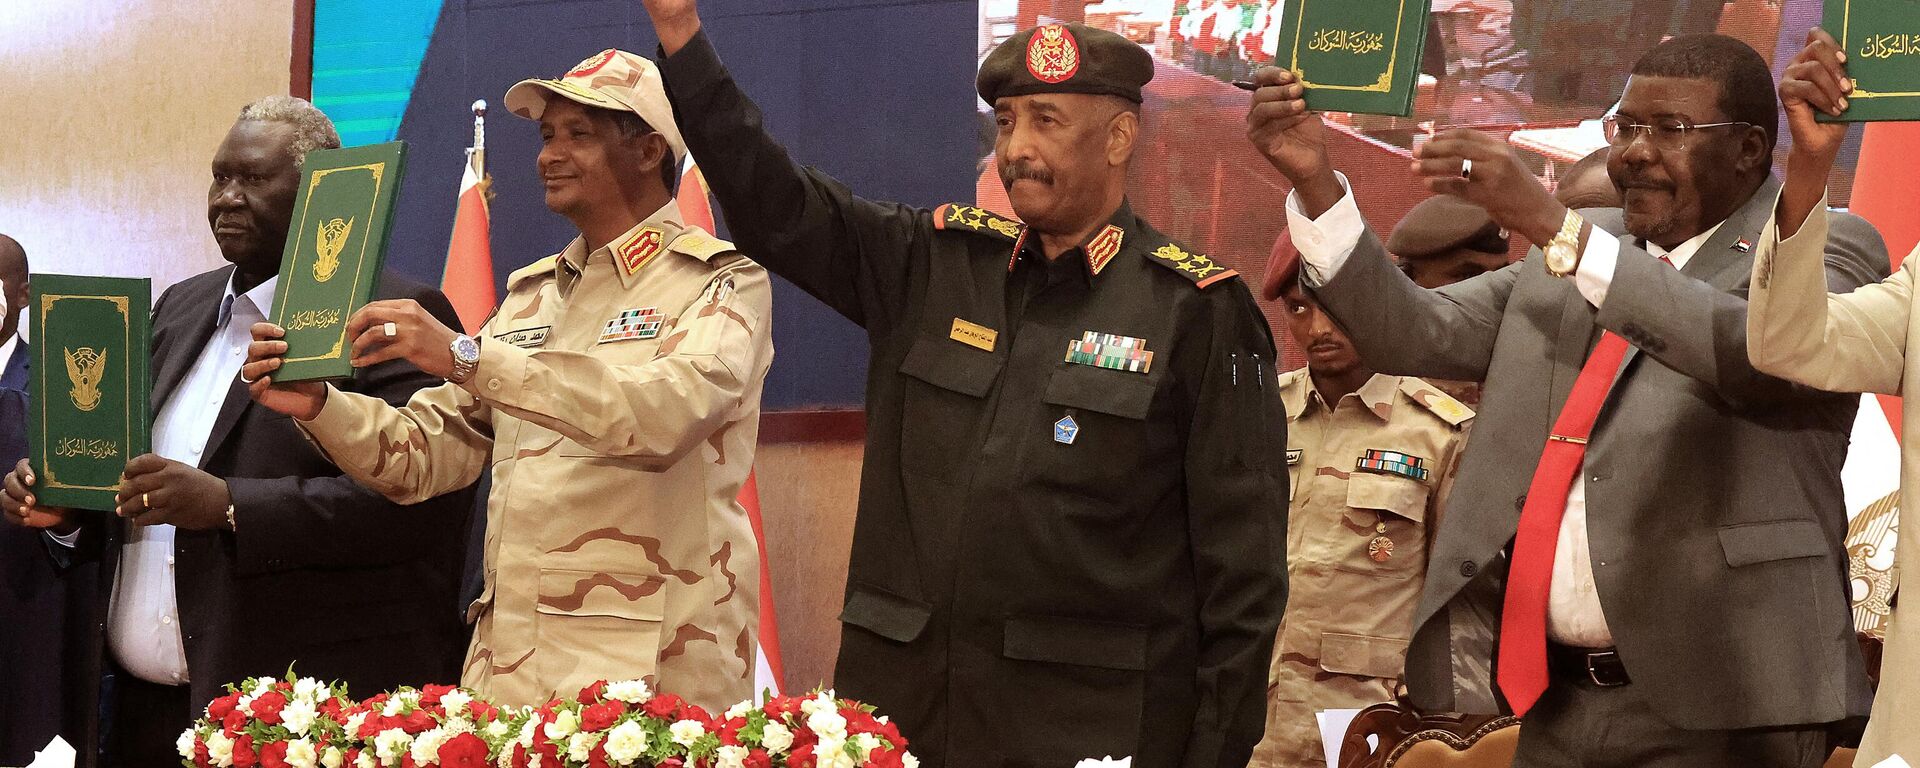 Sudan's Army chief Abdel Fattah al-Burhan (C R) and paramilitary commander Mohamed Hamdan Dagalo (C L) lift documents alongside civilian leaders following the signing of an initial deal aimed at ending a deep crisis caused by last year's military coup, in the capital Khartoum on December 5, 2022. - Sputnik International, 1920, 20.03.2023